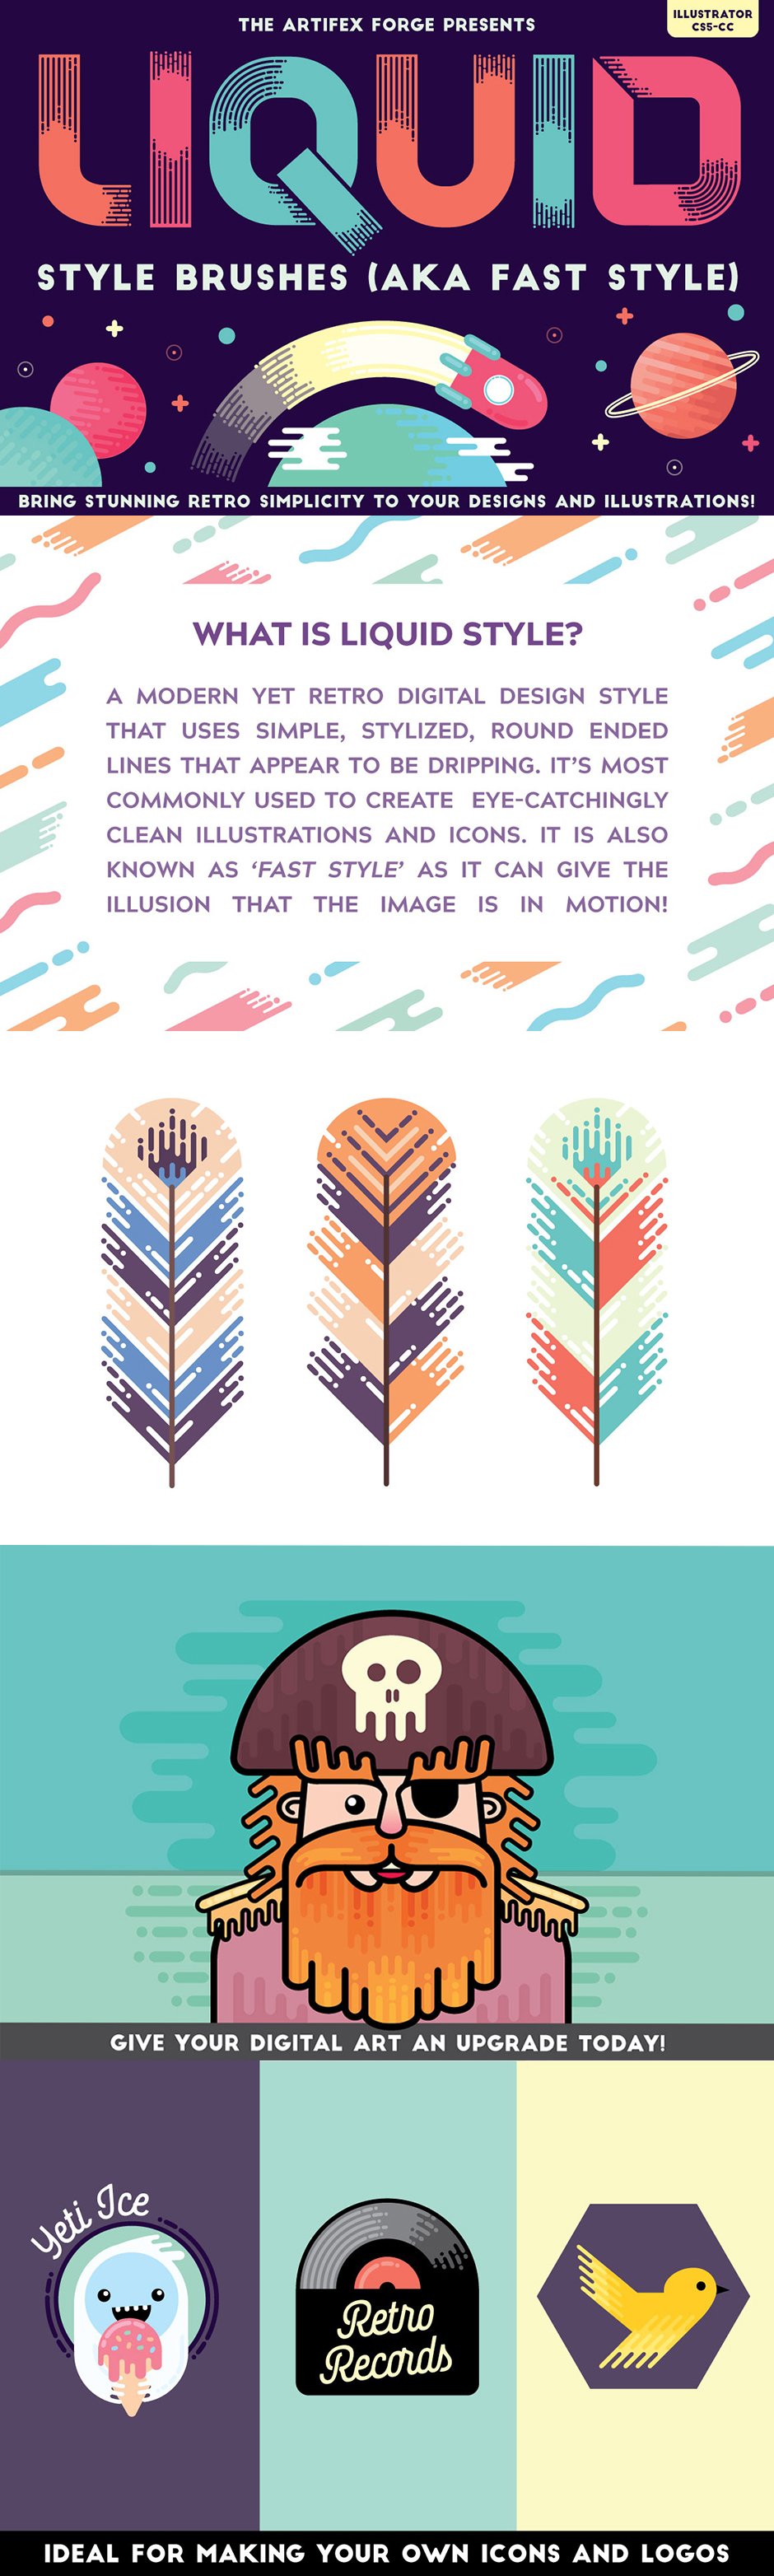 The Inspiring, Creative Vector Collection” width=